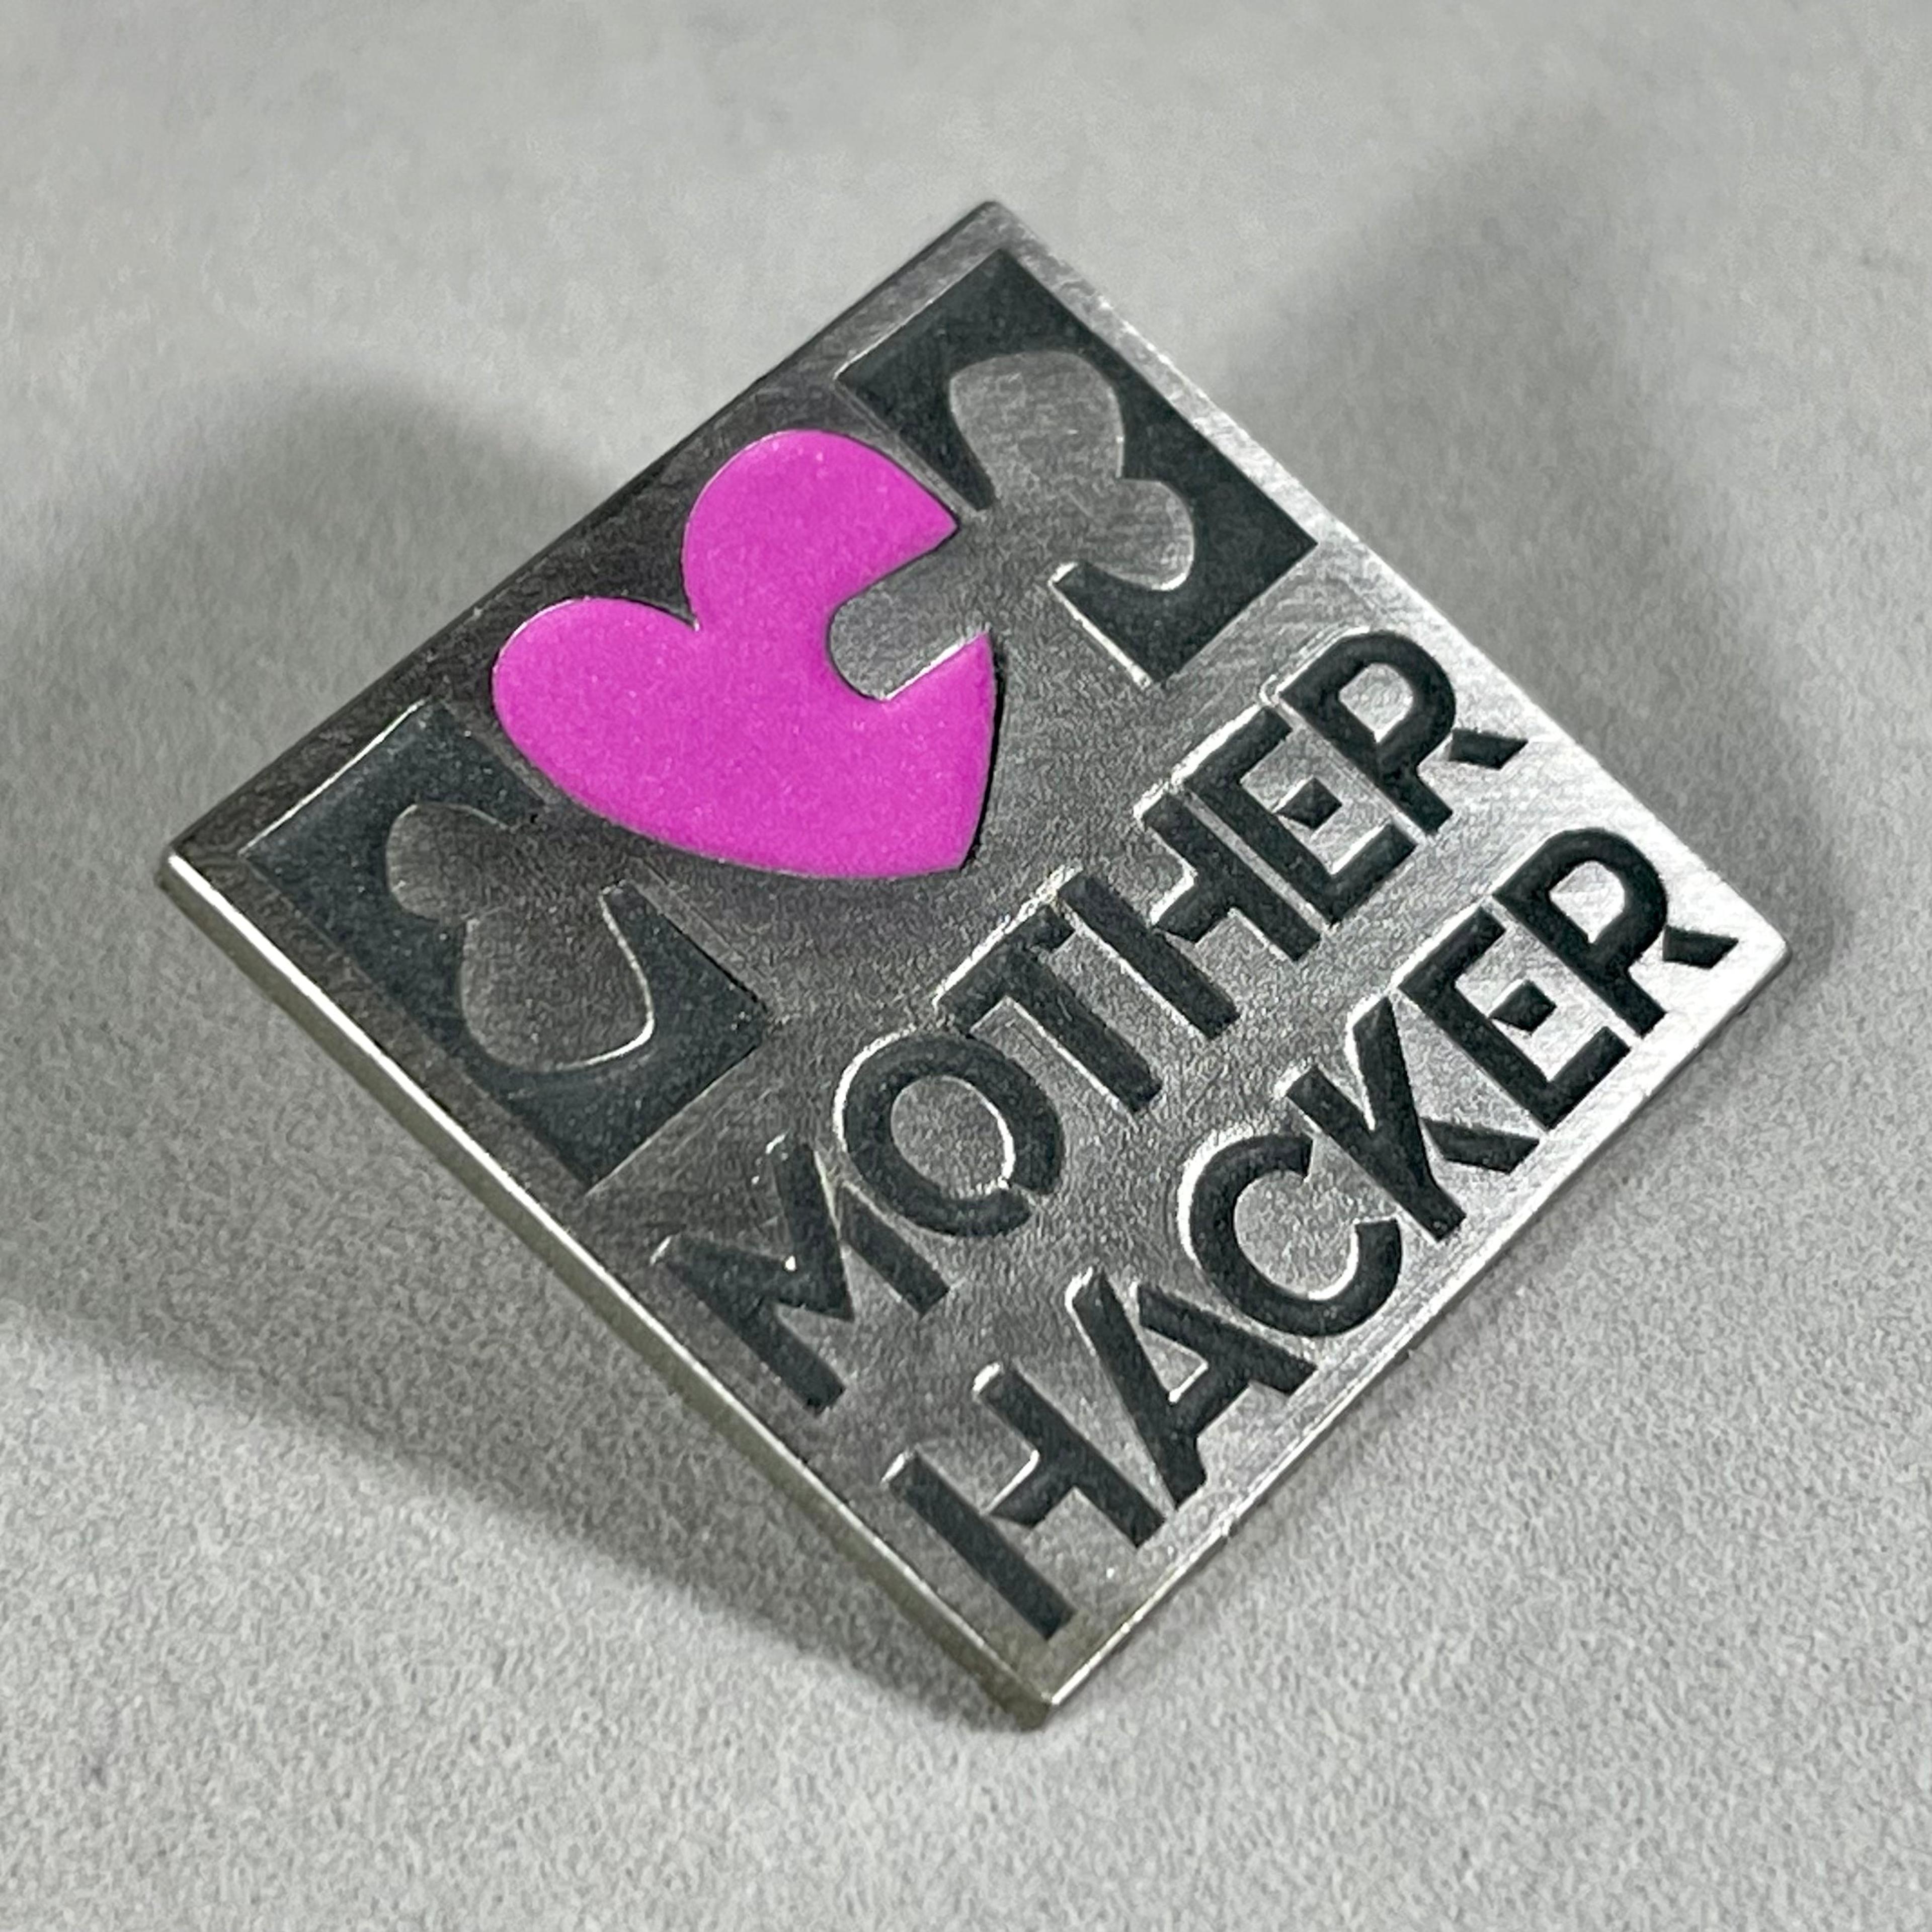 04 - Motherhacker Haters Club Membership (Comes with a Pin)